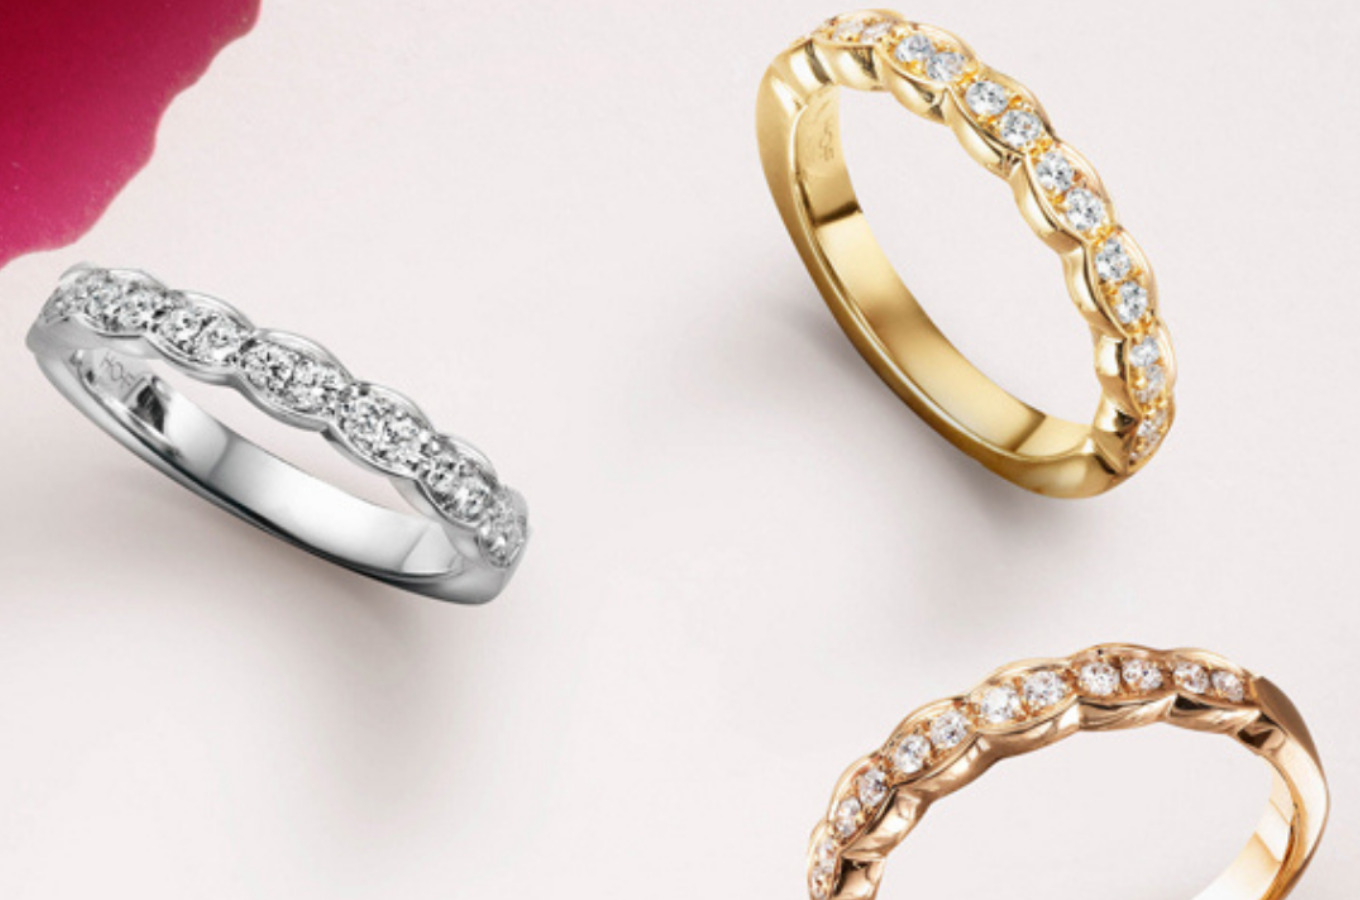 What Is the Best Style for an Eternity Ring?